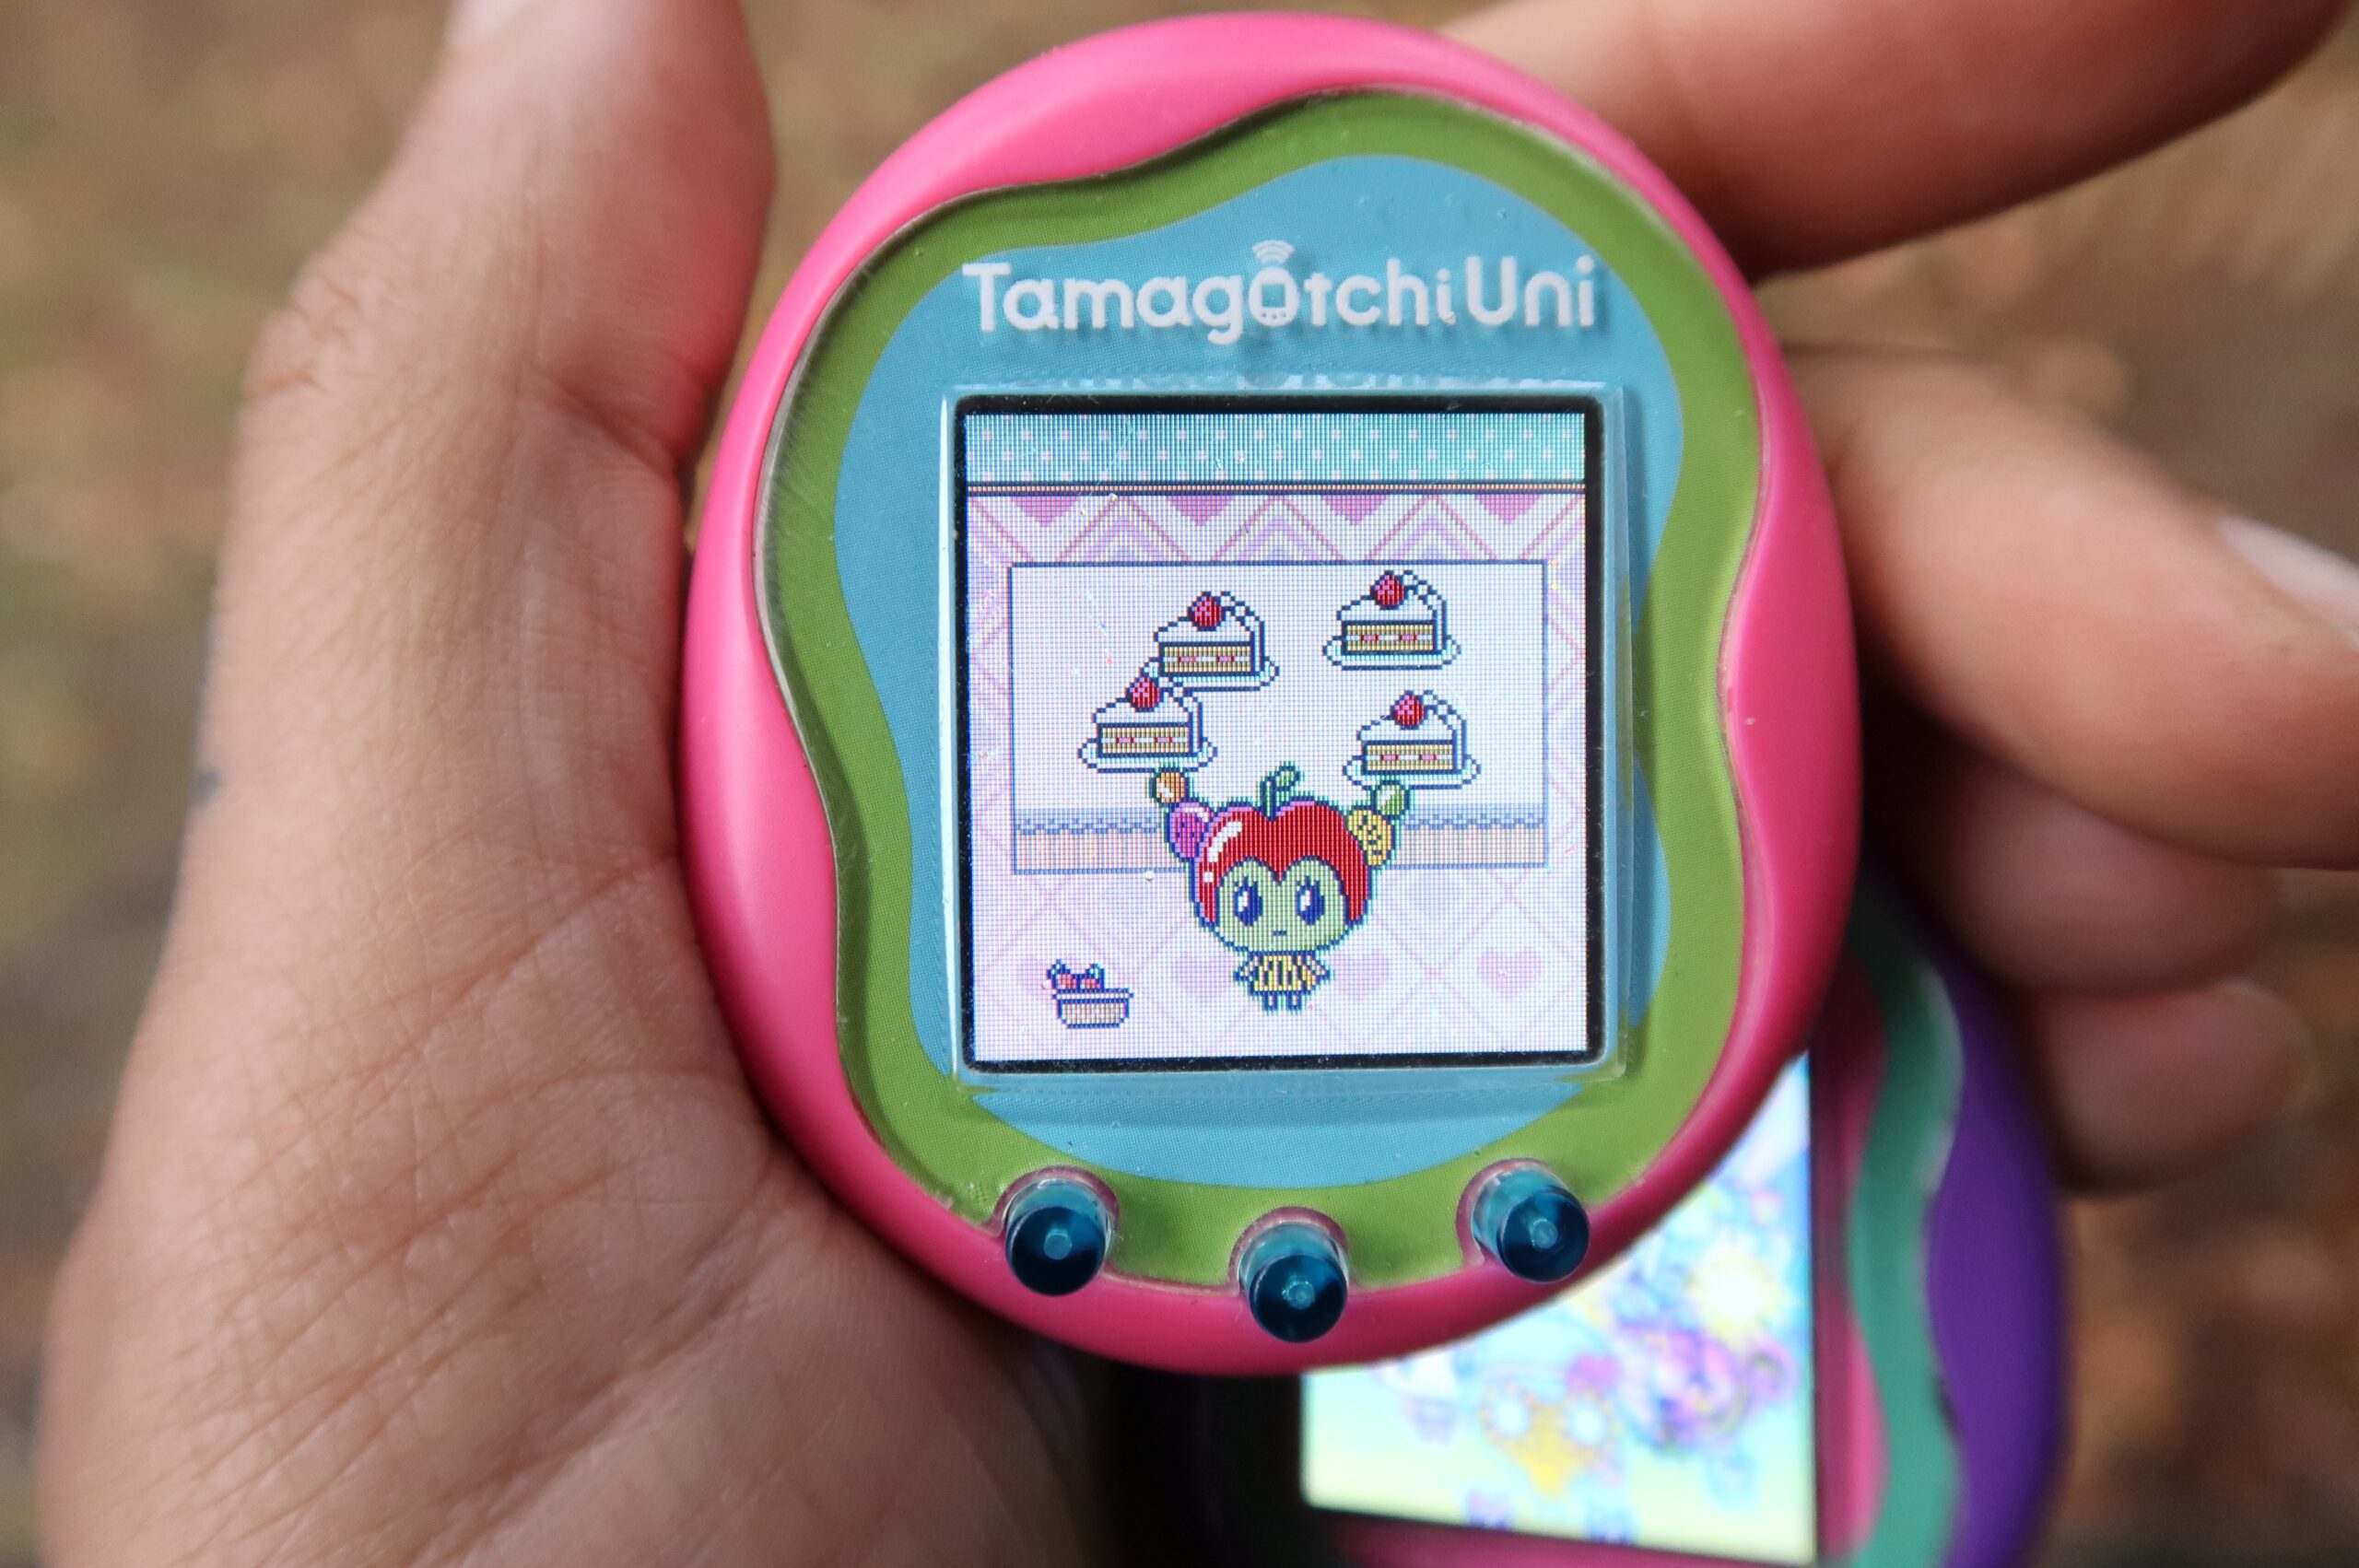 Pink Tamagotchi Uni pictured in a hand displaying the new character Tanghulutchi